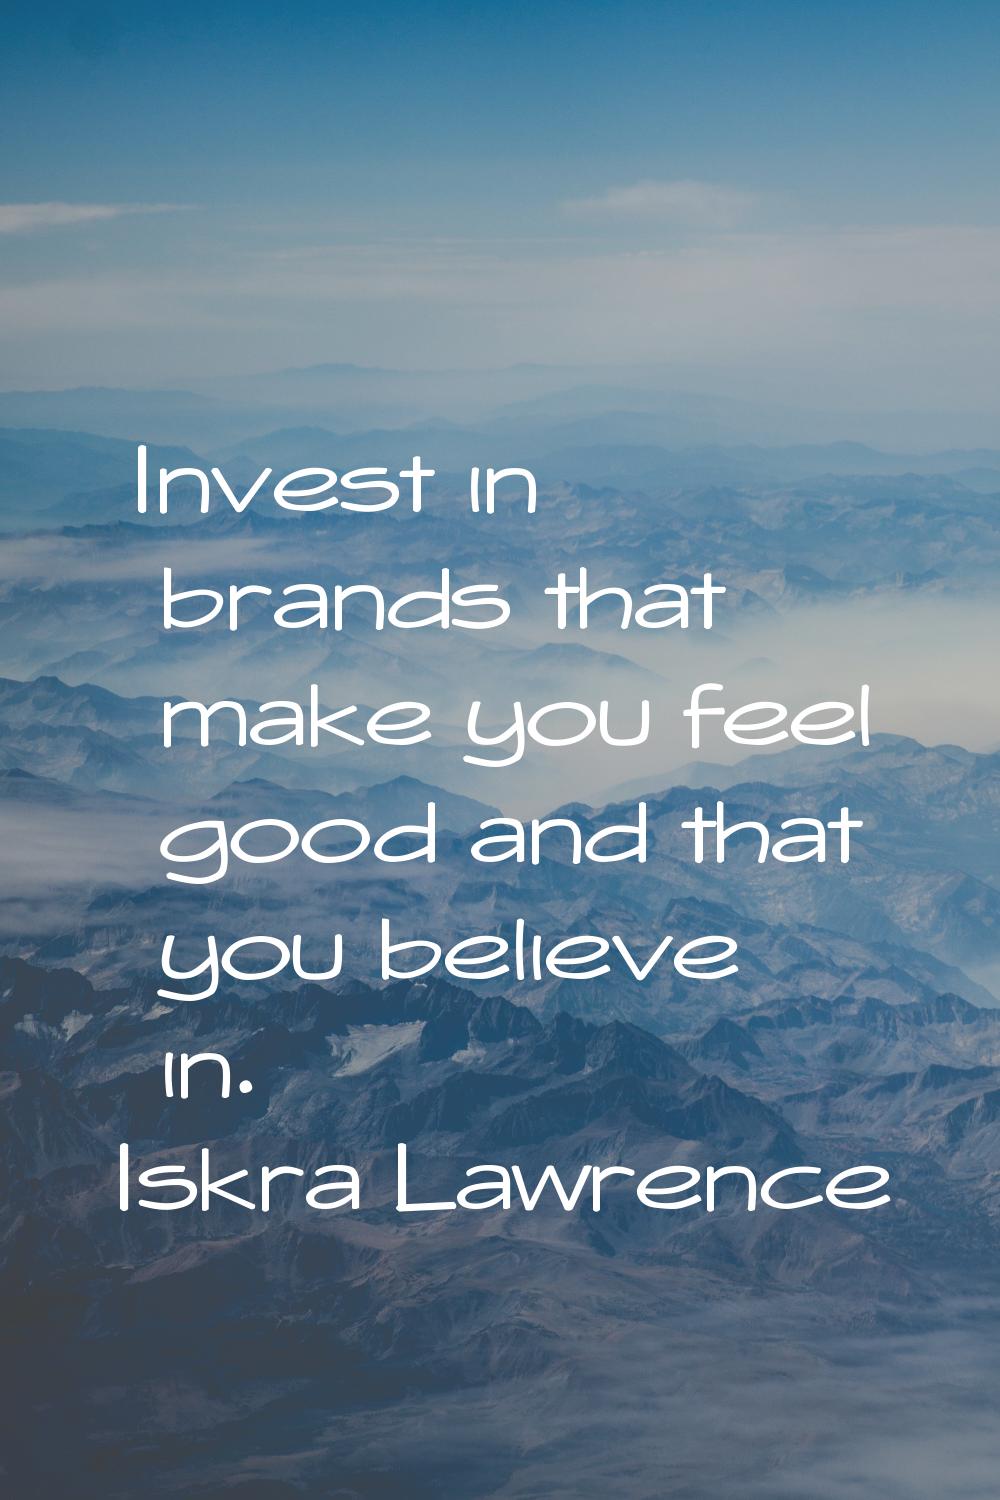 Invest in brands that make you feel good and that you believe in.